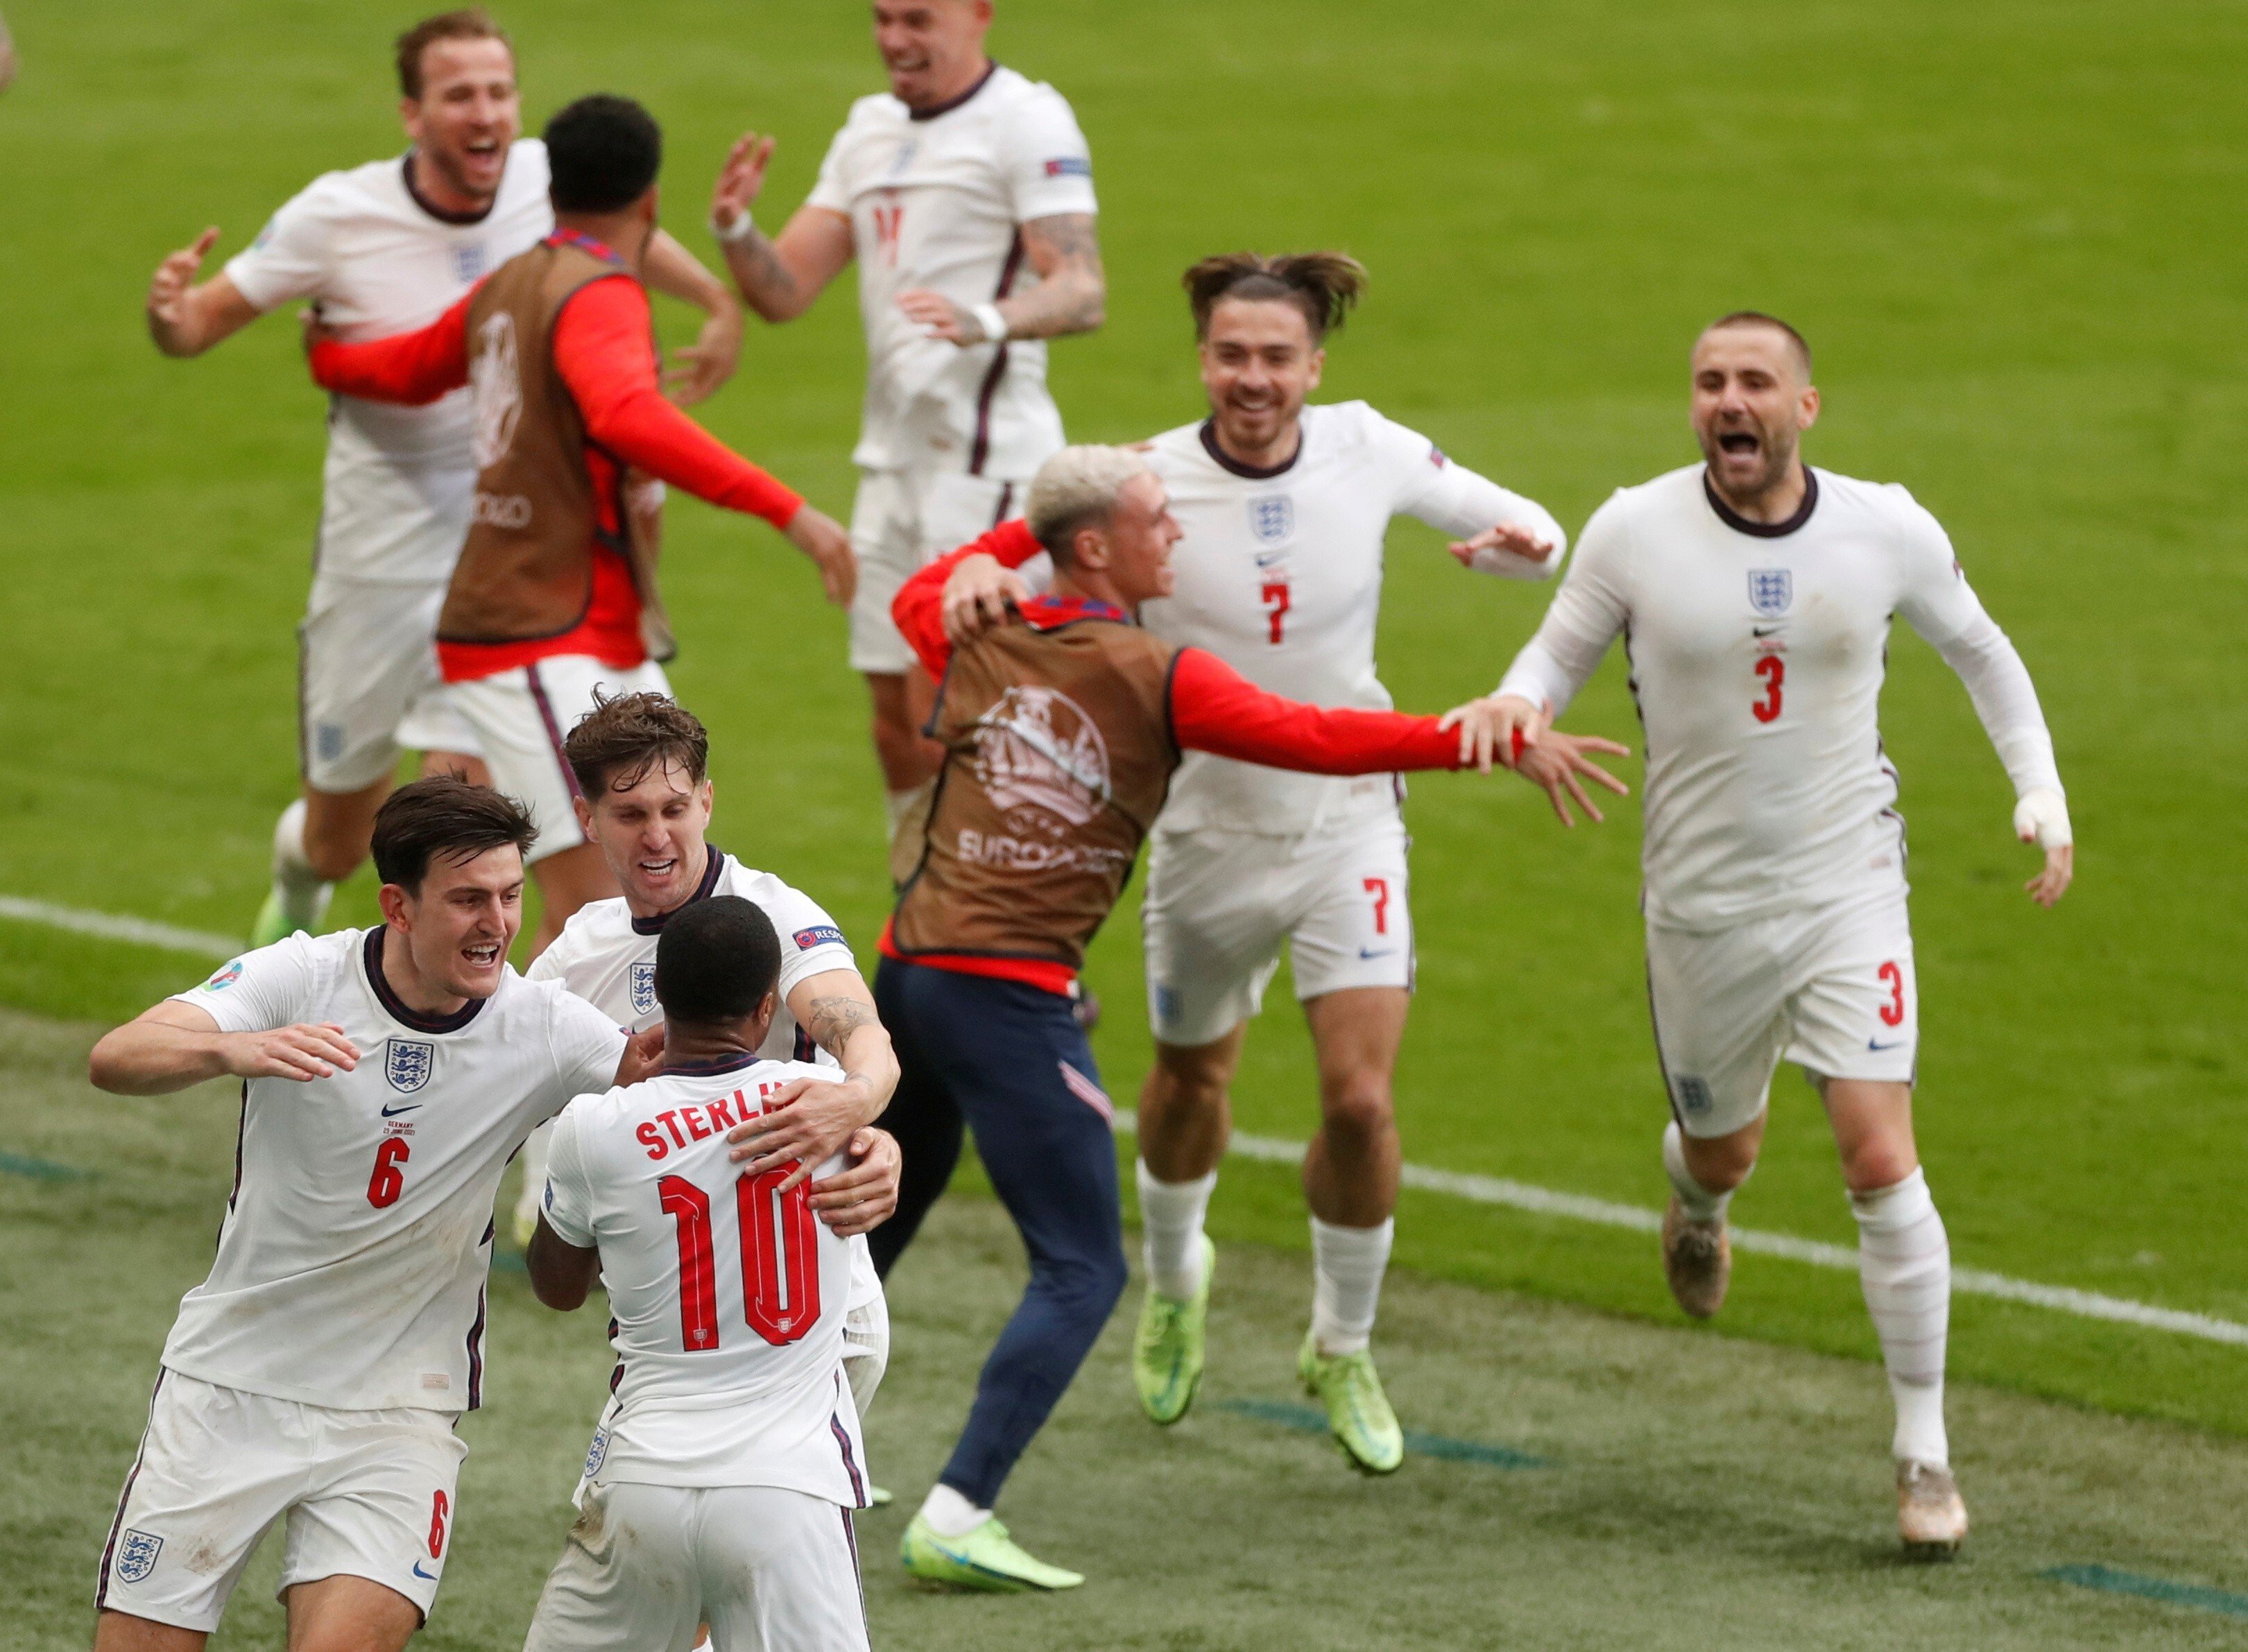 England’s Raheem Sterling celebrates scoring the first goal against Germany with teammates at Wembley Stadium in London on Tuesday. Photo: Reuters